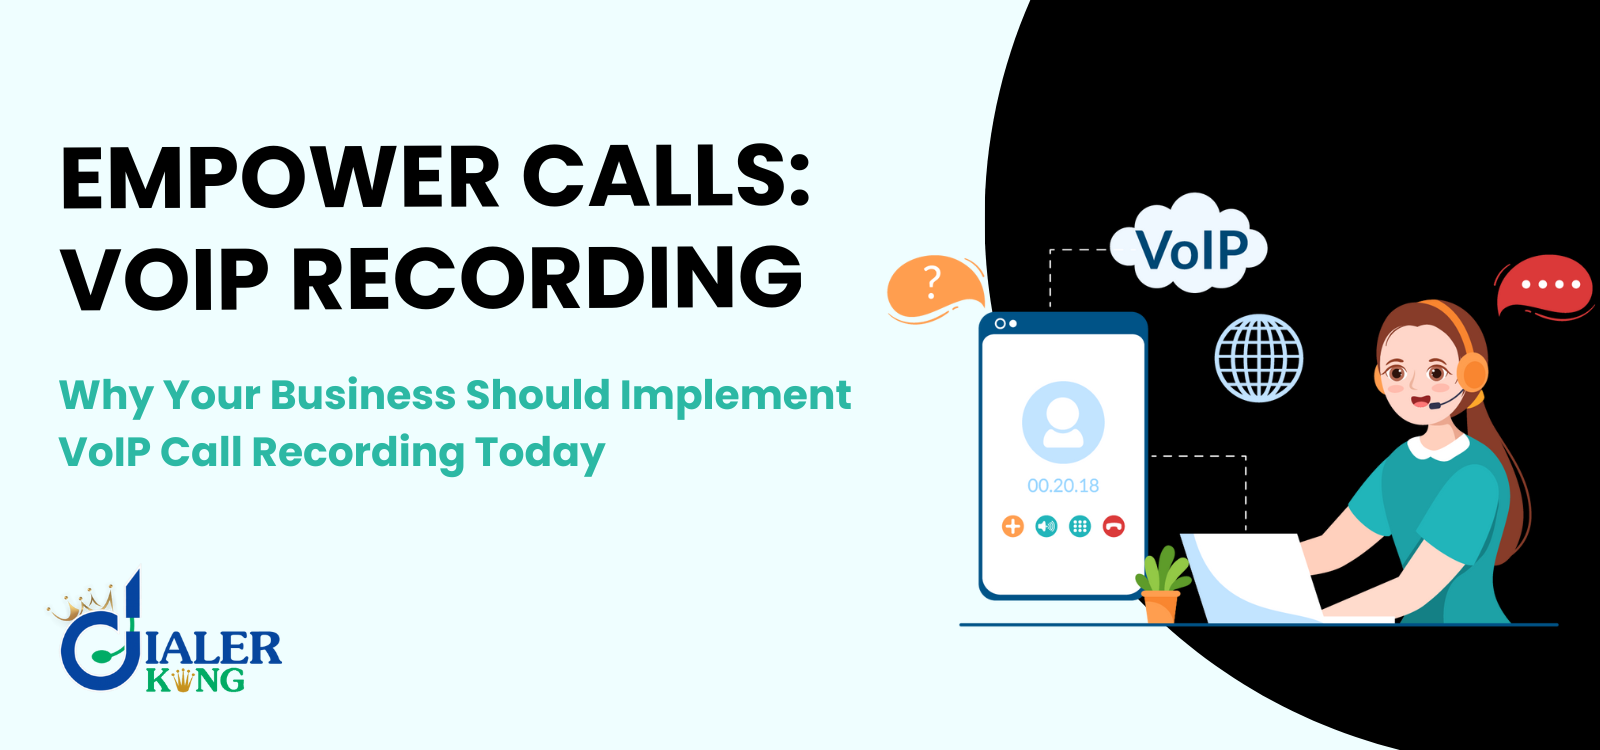 Why-Your-Business-Should-Implement-VoIP-Call-Recording-Today